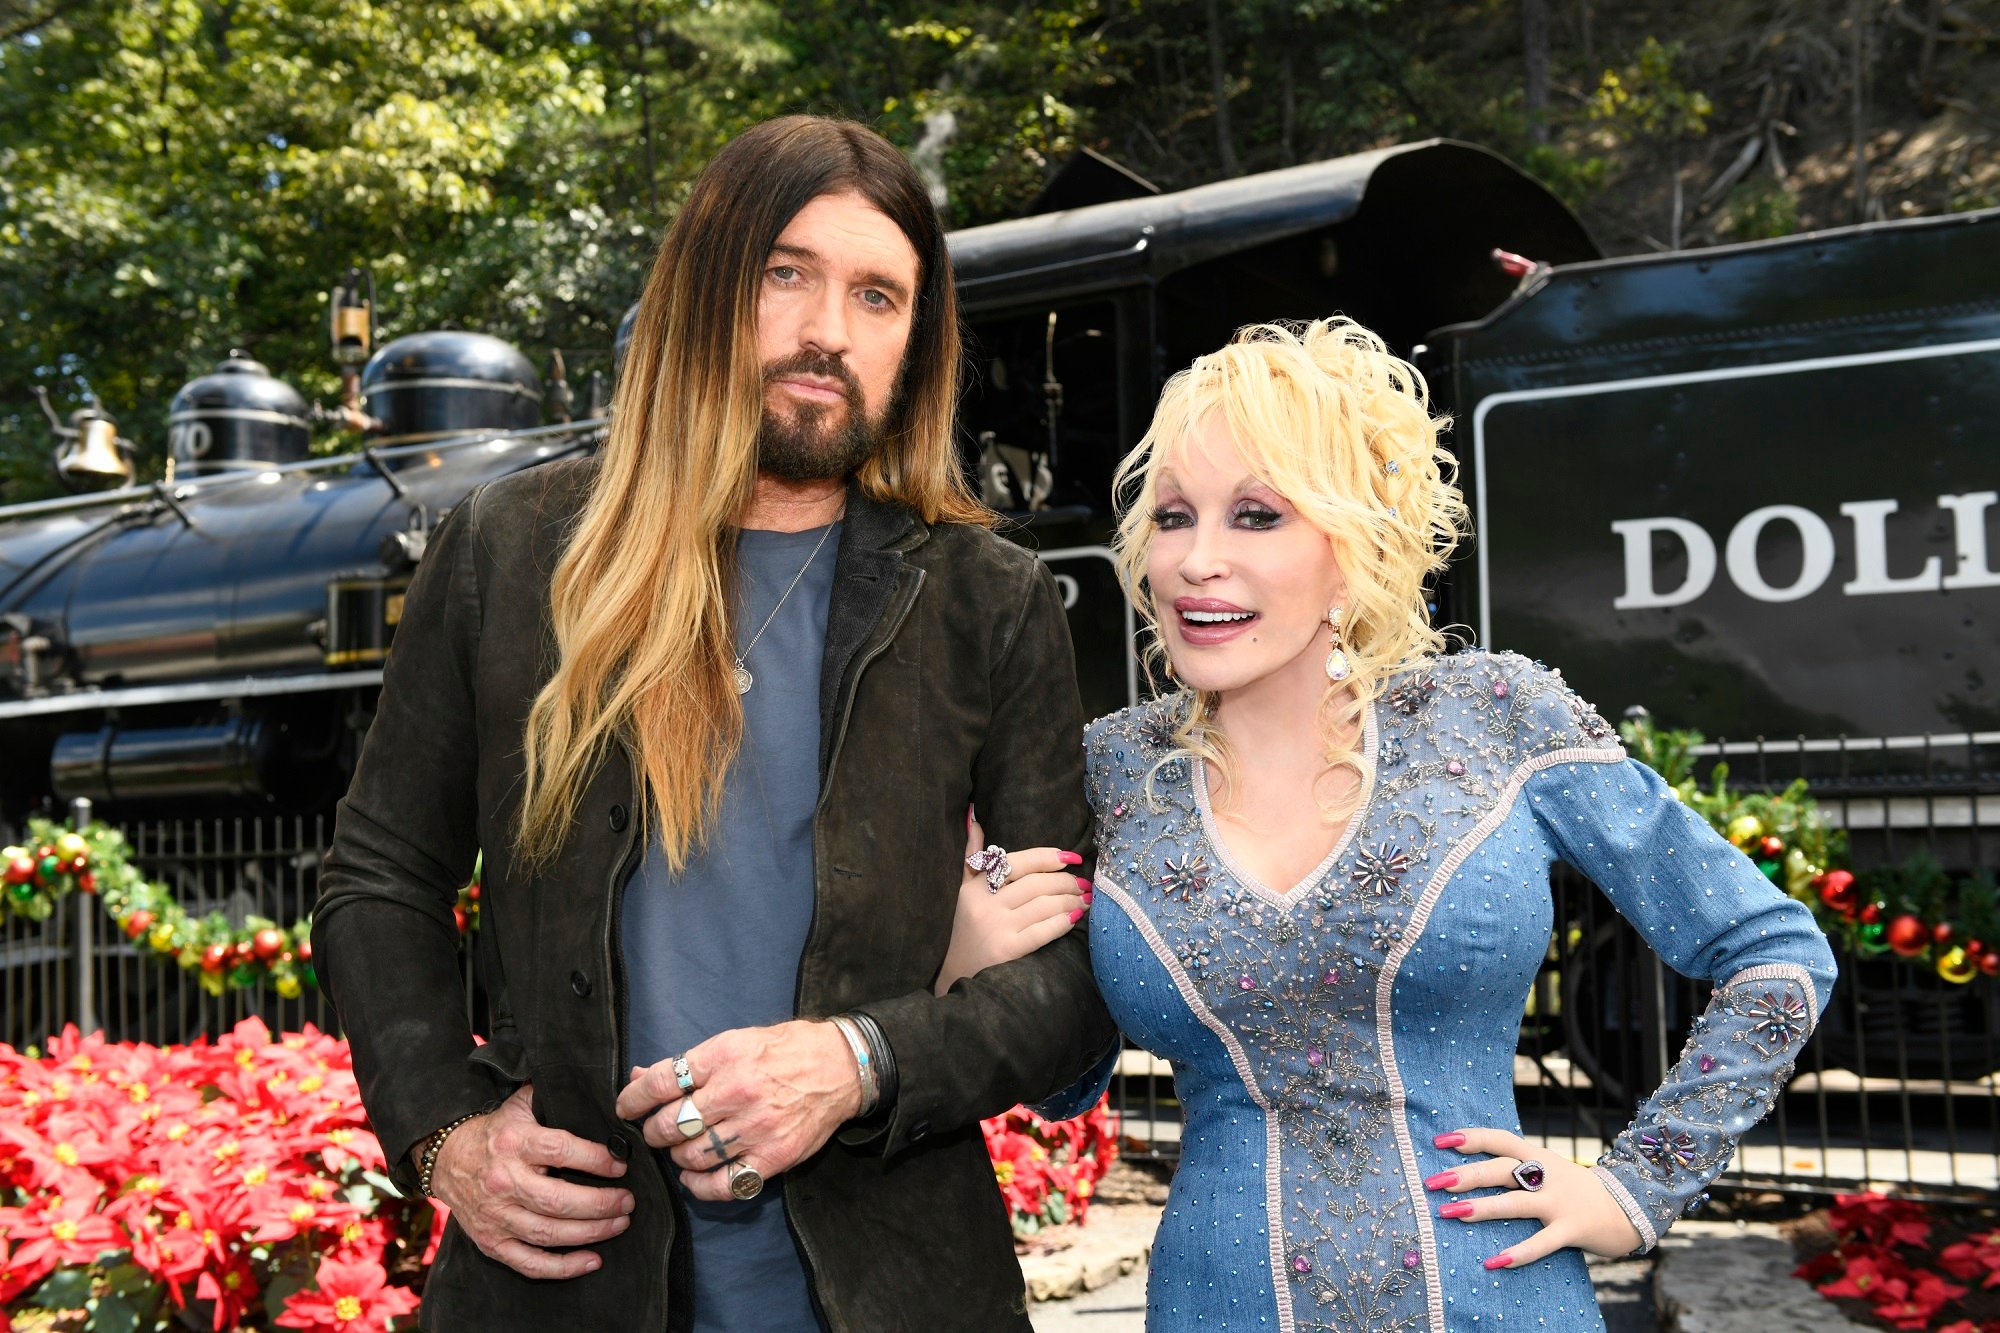 Billy Ray Cyrus and Dolly Parton stand arm-in-arm and look at the camera